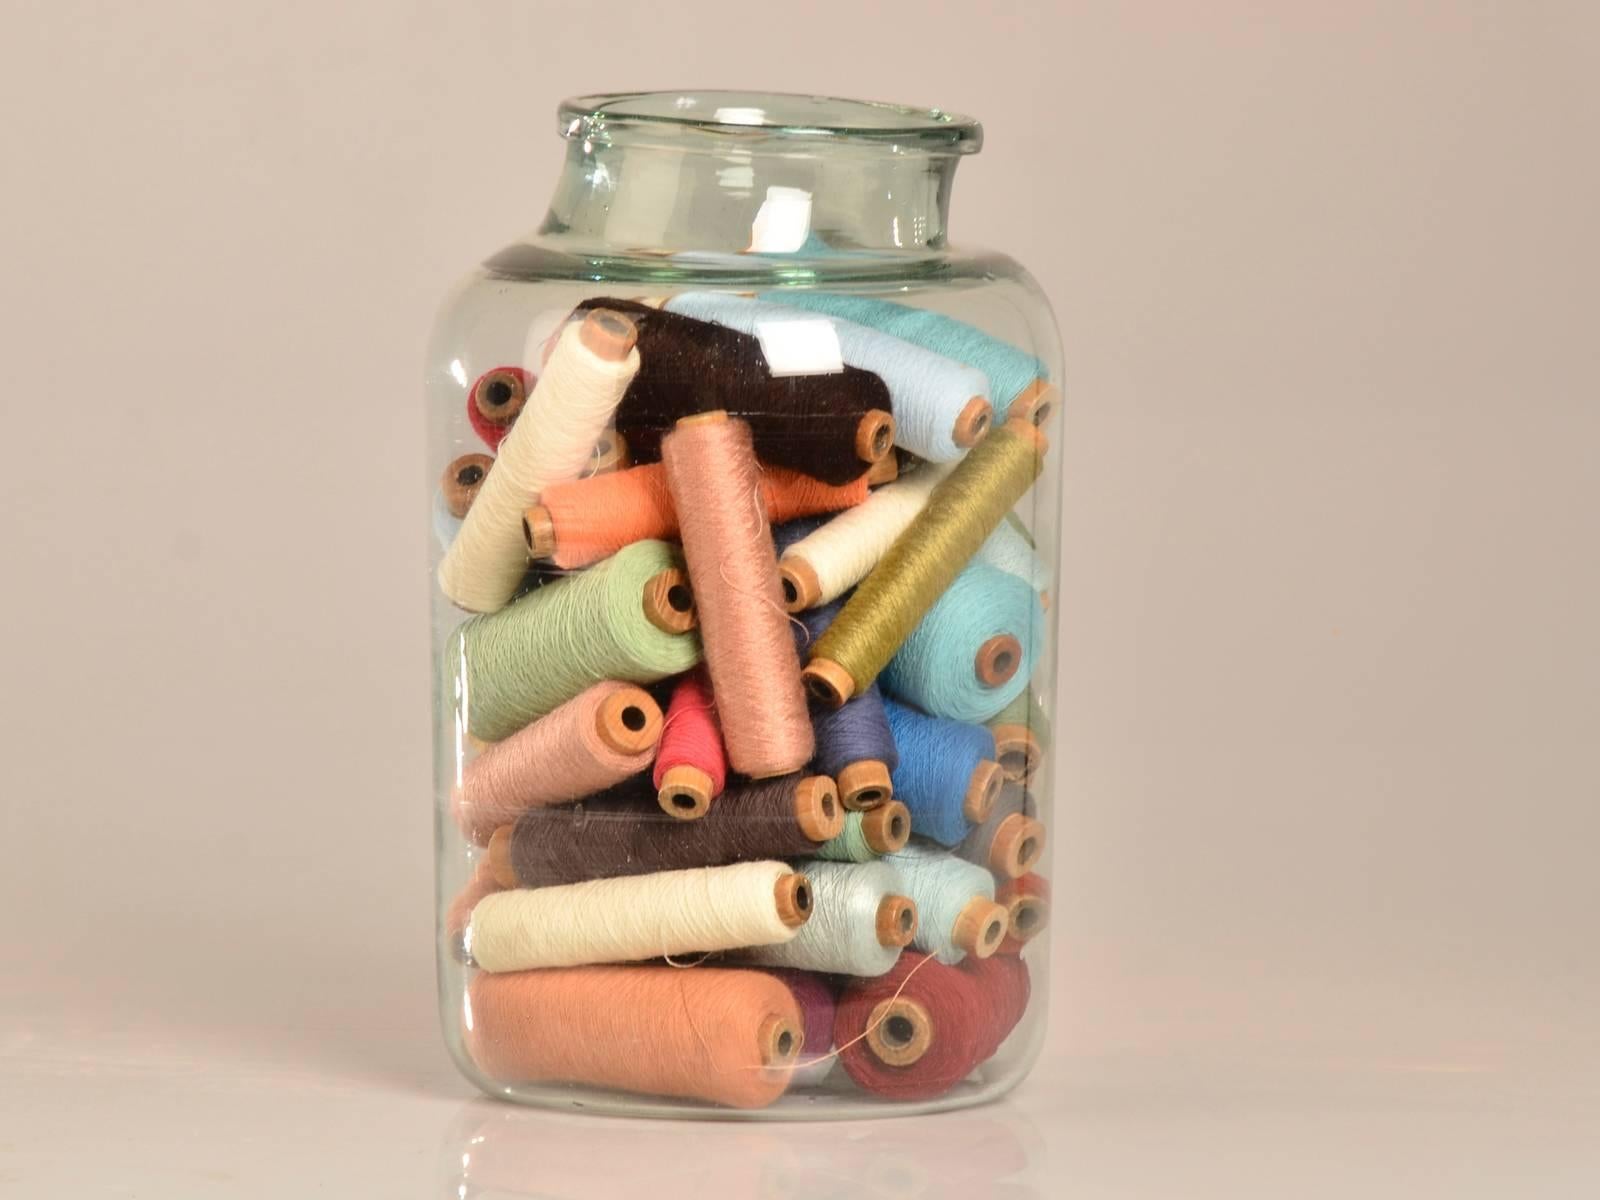 Receive our new selections direct from 1stdibs by email each week. Please click Follow Dealer below and see them first!

A wonderful hand blown glass bottle each filled with an assortment of bobbins of coloured thread rescued from a mill in Belgium